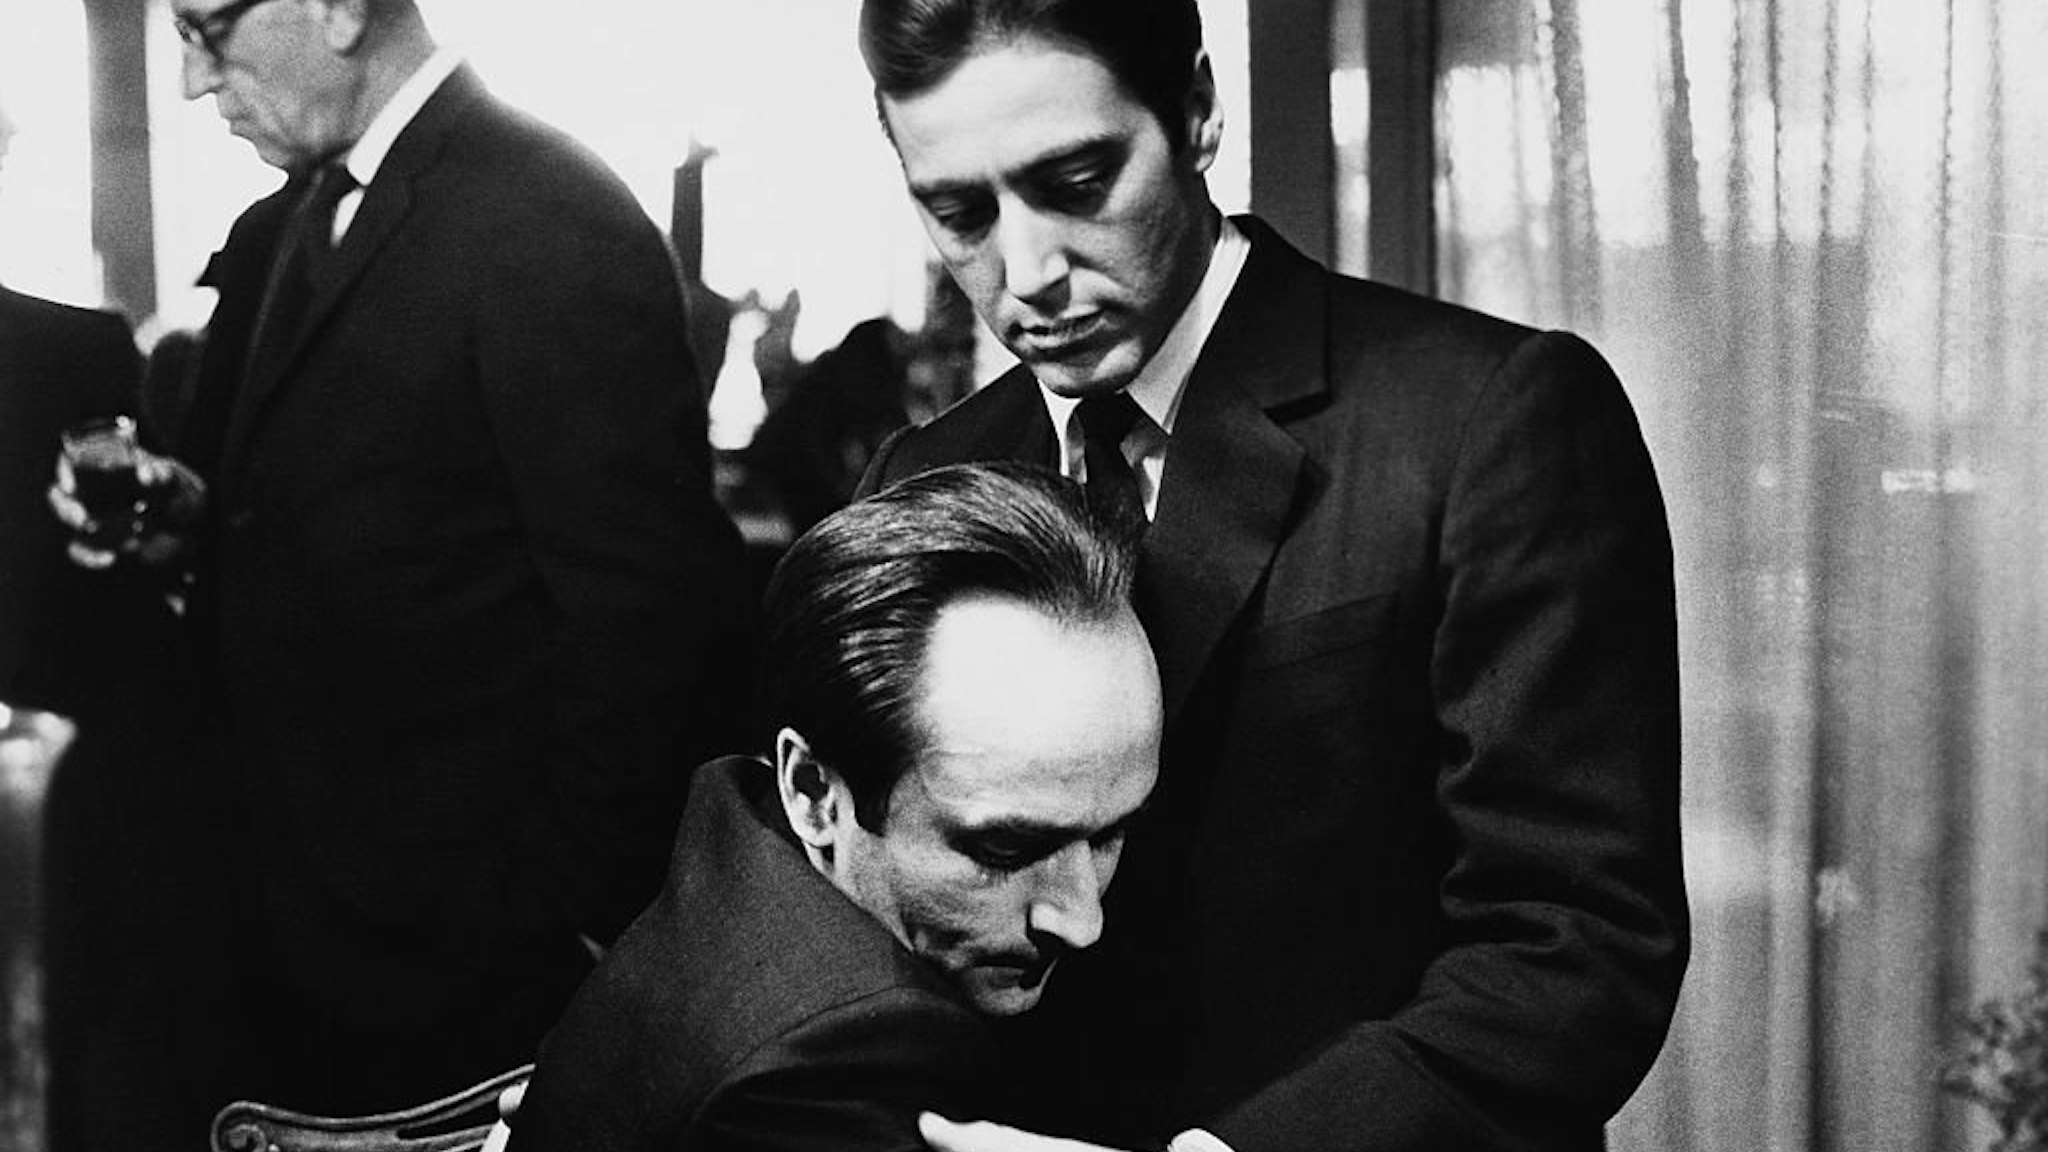 Frederico "Fredo" Corleone (John Cazale) holds his brother Michael Corleone (Al Pacino) at a family funeral in Francis Ford Coppola's The Godfather: Part II.